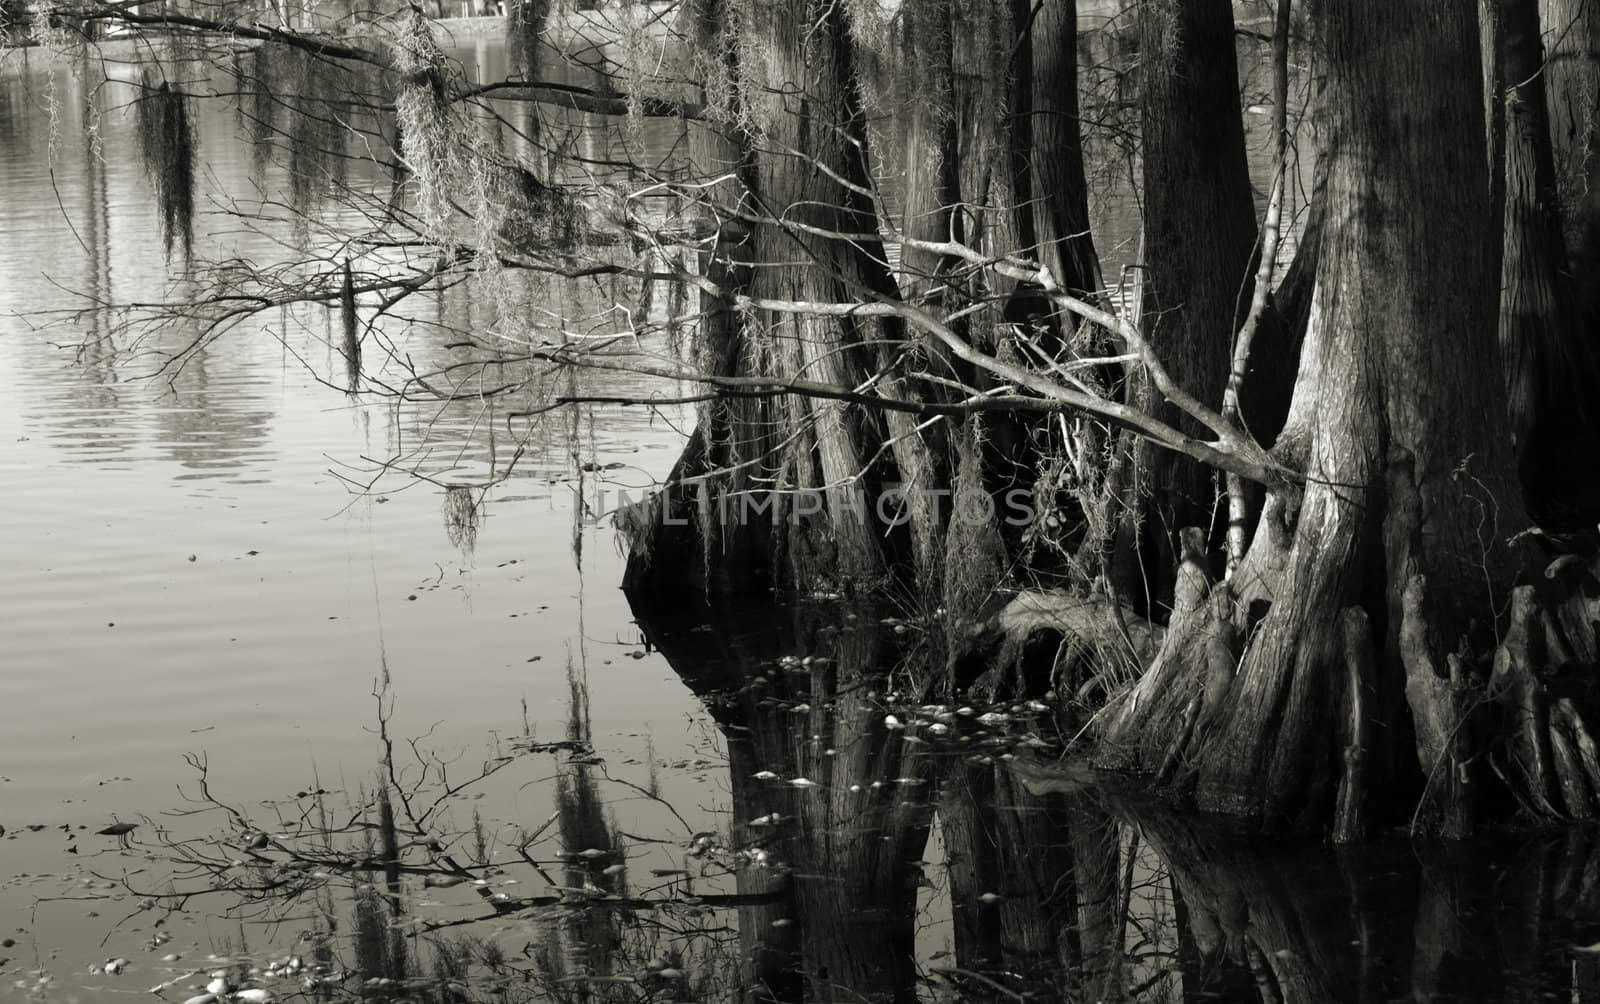 Swamp reflections by northwoodsphoto